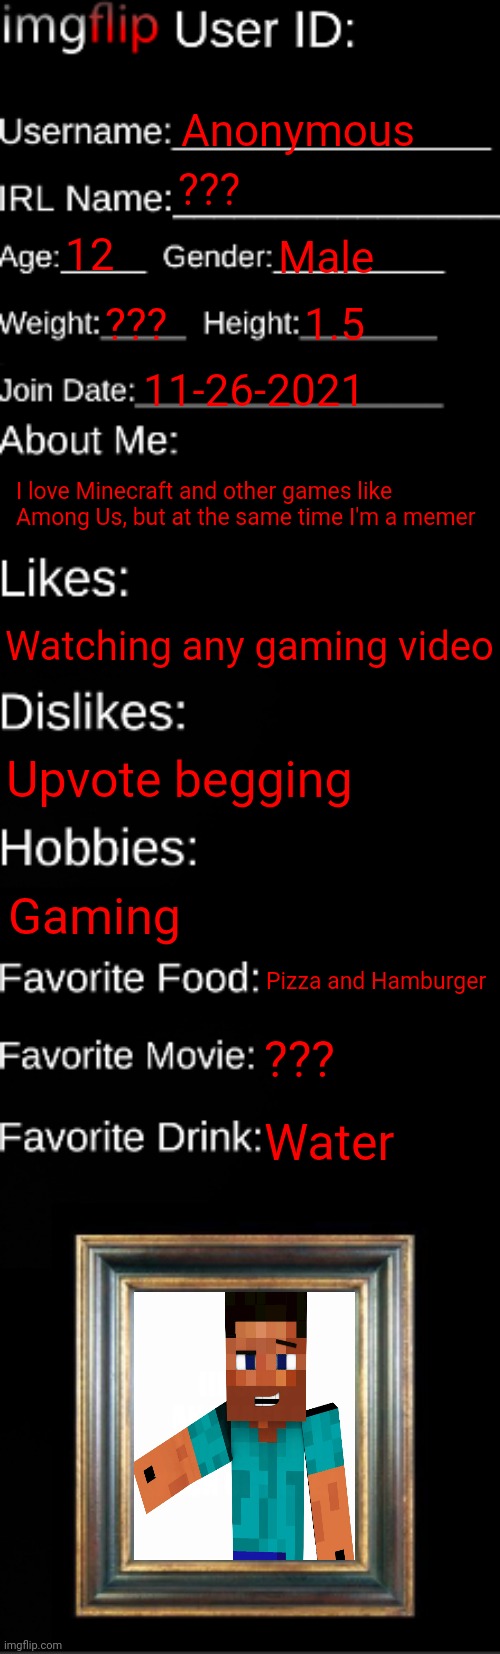 The gamer | Anonymous; ??? 12; Male; ??? 1.5; 11-26-2021; I love Minecraft and other games like Among Us, but at the same time I'm a memer; Watching any gaming video; Upvote begging; Gaming; Pizza and Hamburger; ??? Water | image tagged in imgflip id card,gaming,memes | made w/ Imgflip meme maker